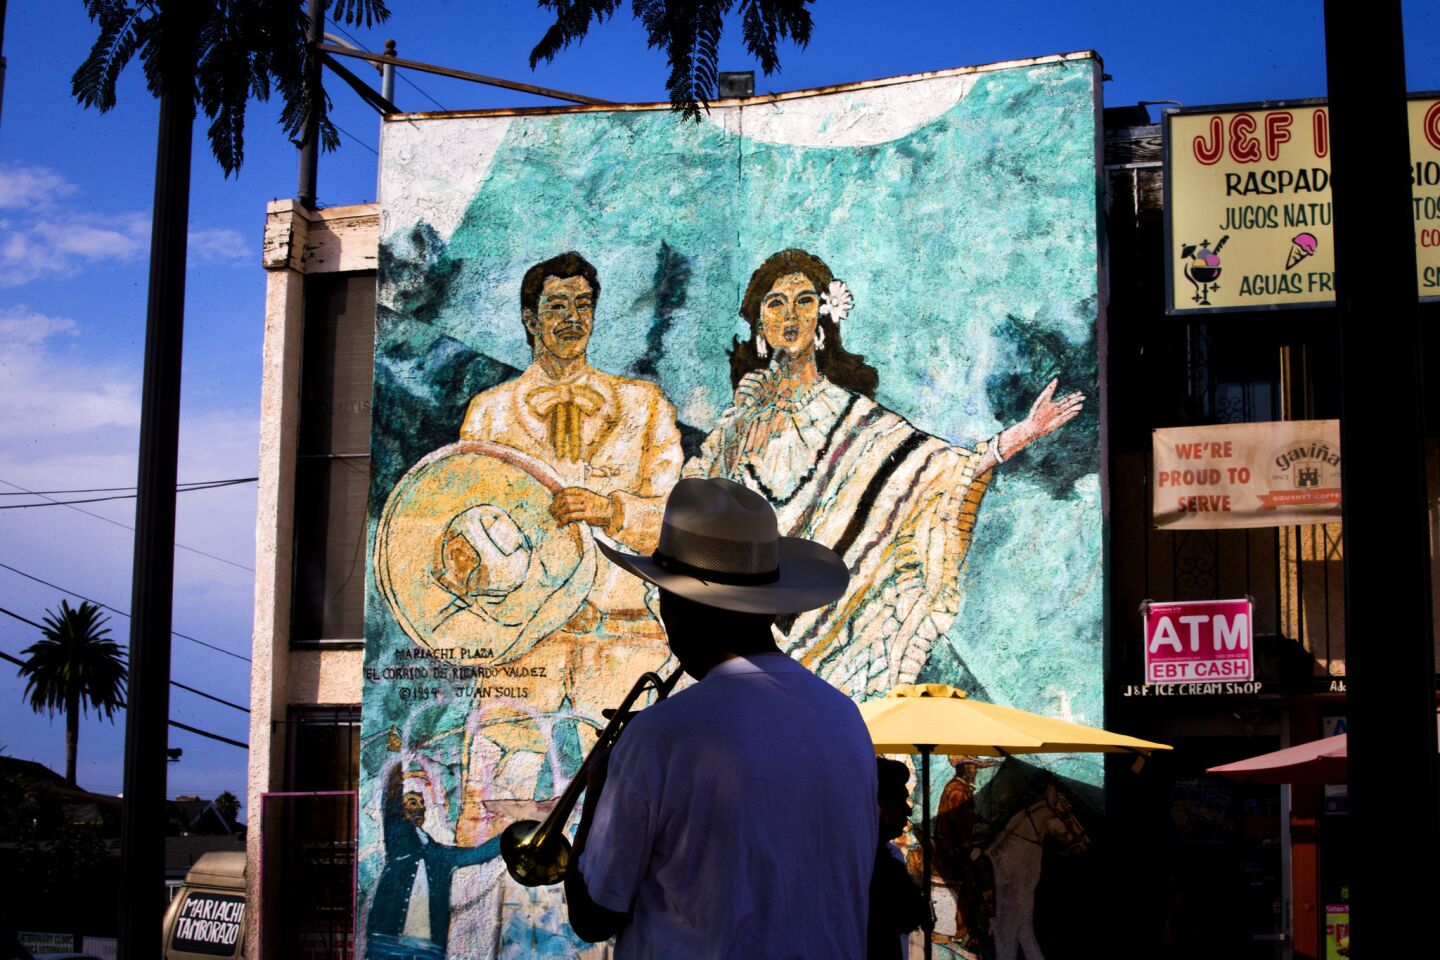 Mariachi player Natolio Nuñez, who has been playing trumpet for 40 years, practices in the shade while silhouetted against a mural amid a heat wave where temperature reached 93 degrees at Mariachi Plaza de Los Angeles in Boyle Heights.